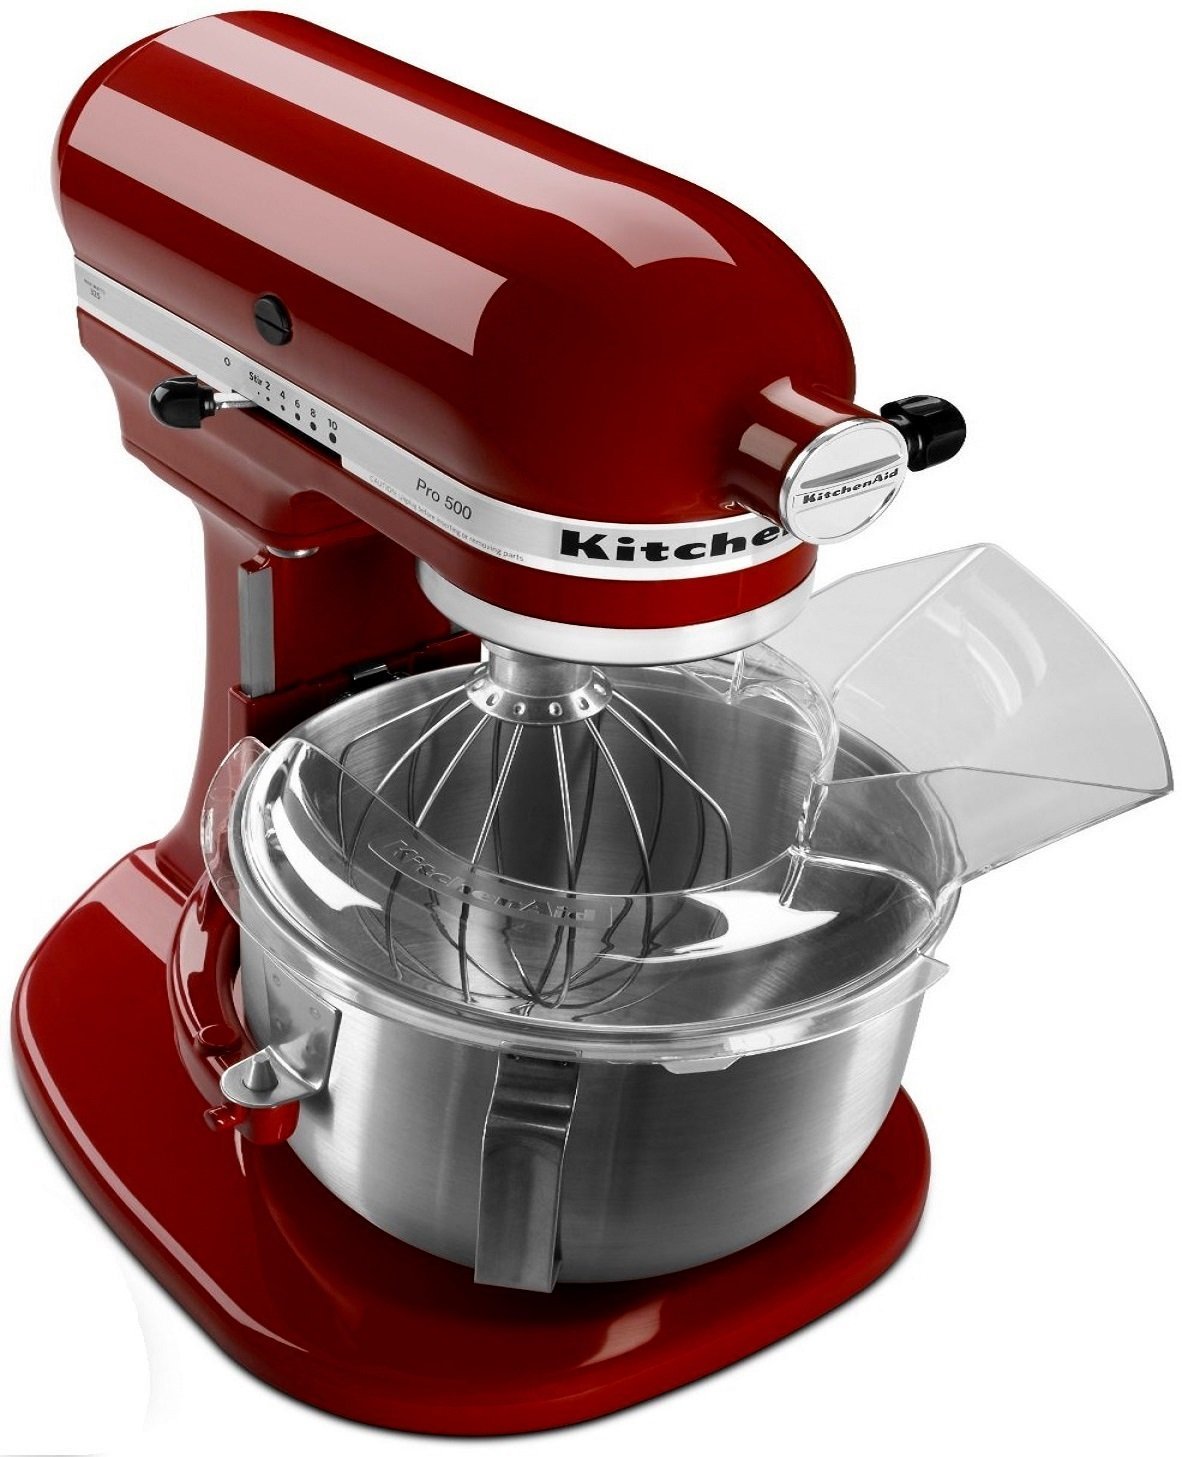 KitchenAid PRO 500 Series 5-Quart Lift Style Stand Mixer All Metal (Gloss Cinnamon), only $239.99, free shipping